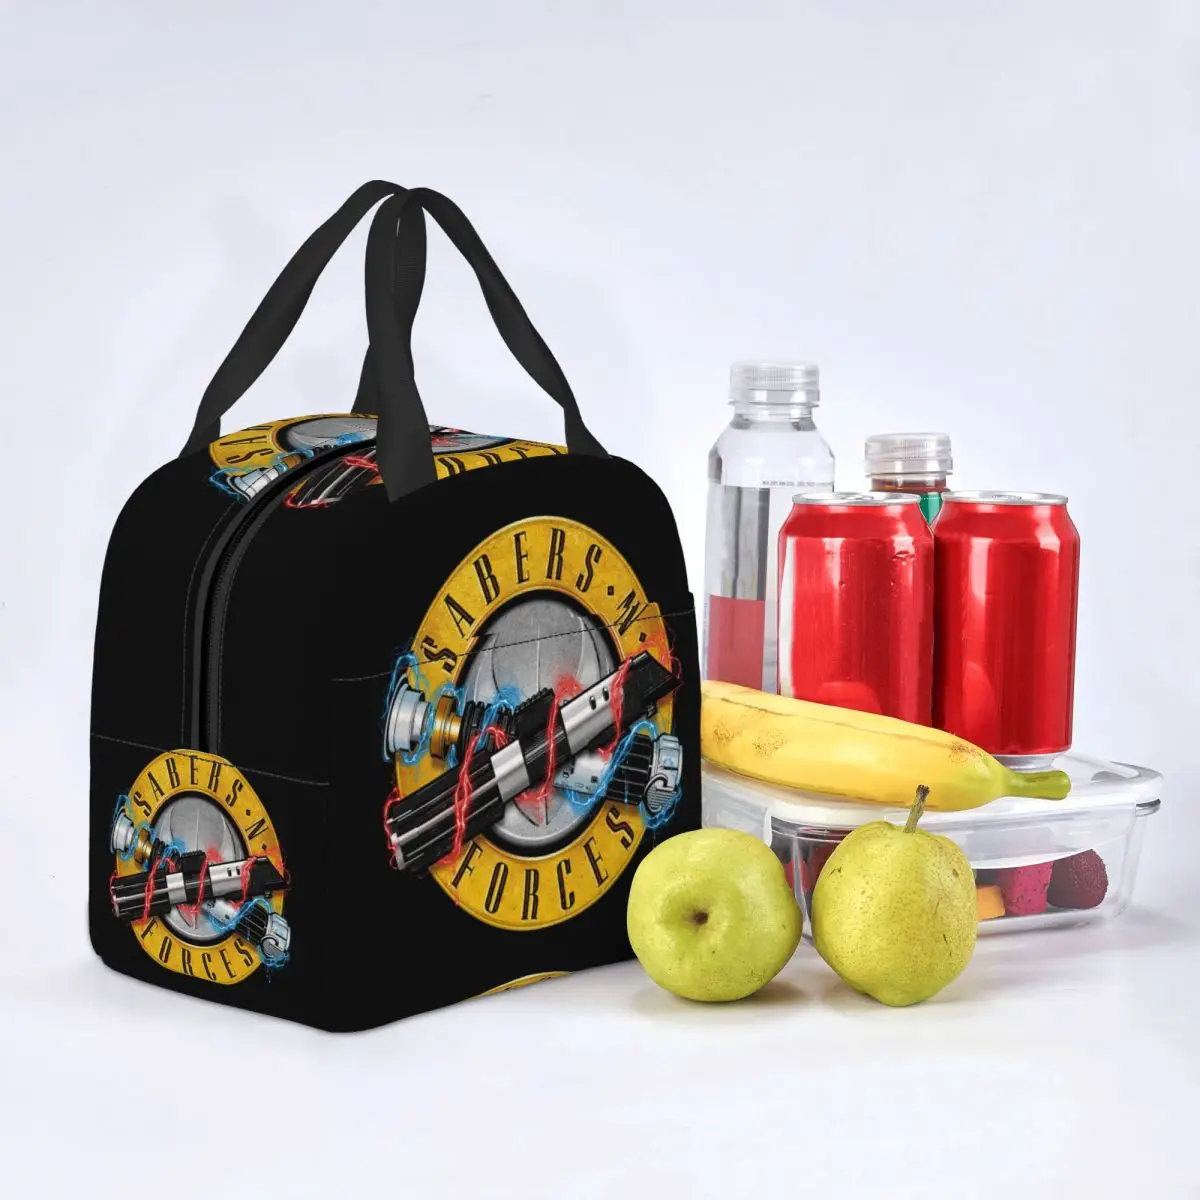 Guns N Roses Lightsaber Merch Lunch Bag Portable Insulated Canvas Cooler Bag Thermal Food Picnic Lunch Box images - 6